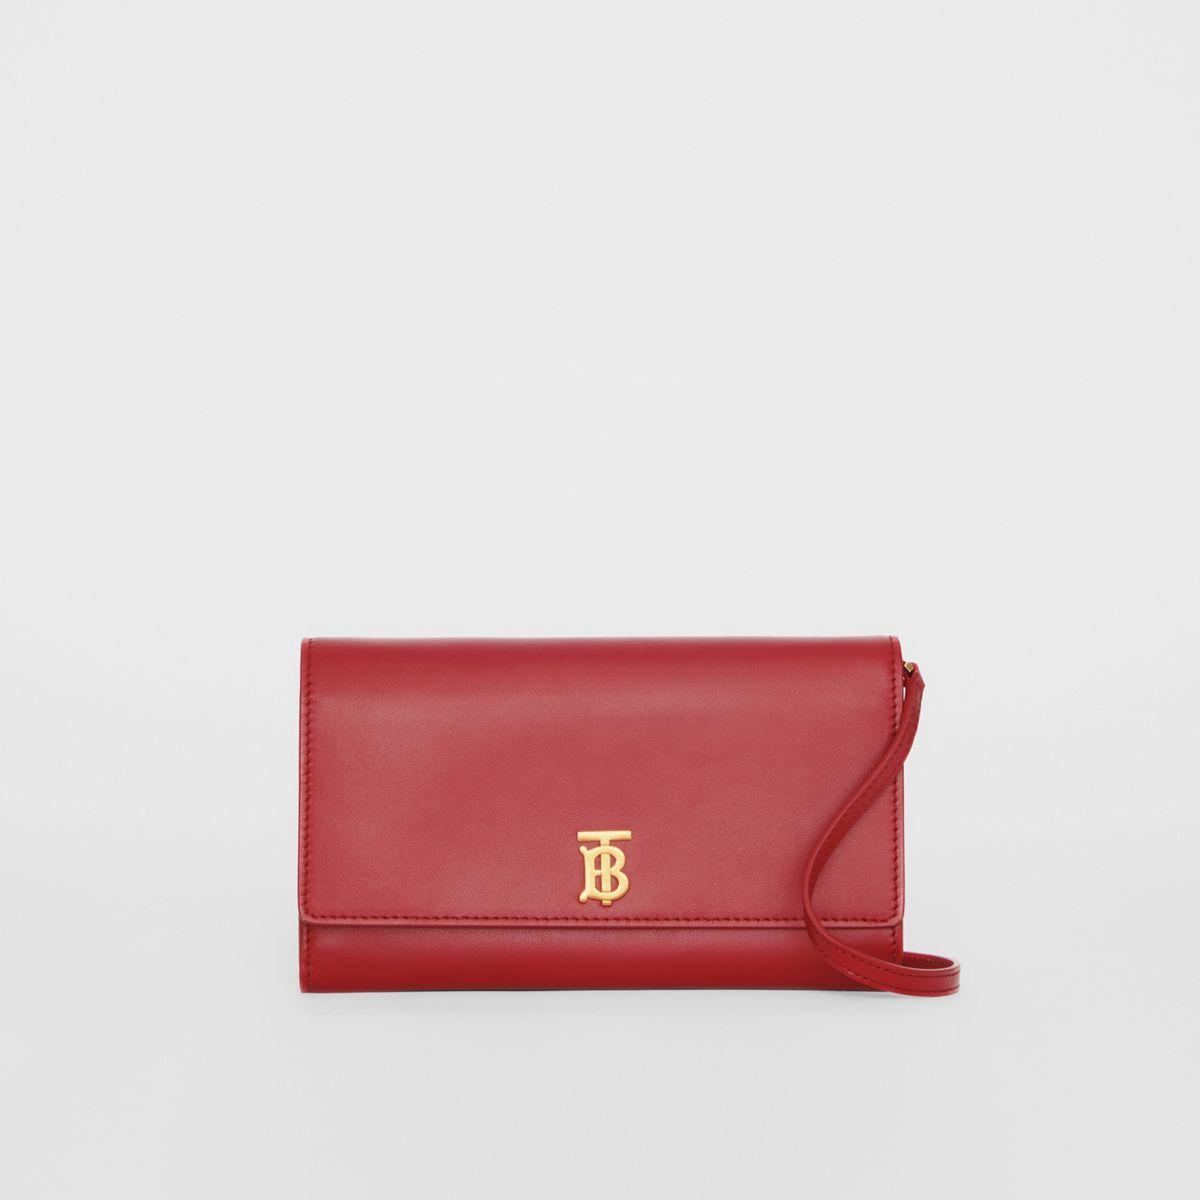 Lyst - Burberry Monogram Motif Leather Wallet With Detachable Strap in Red